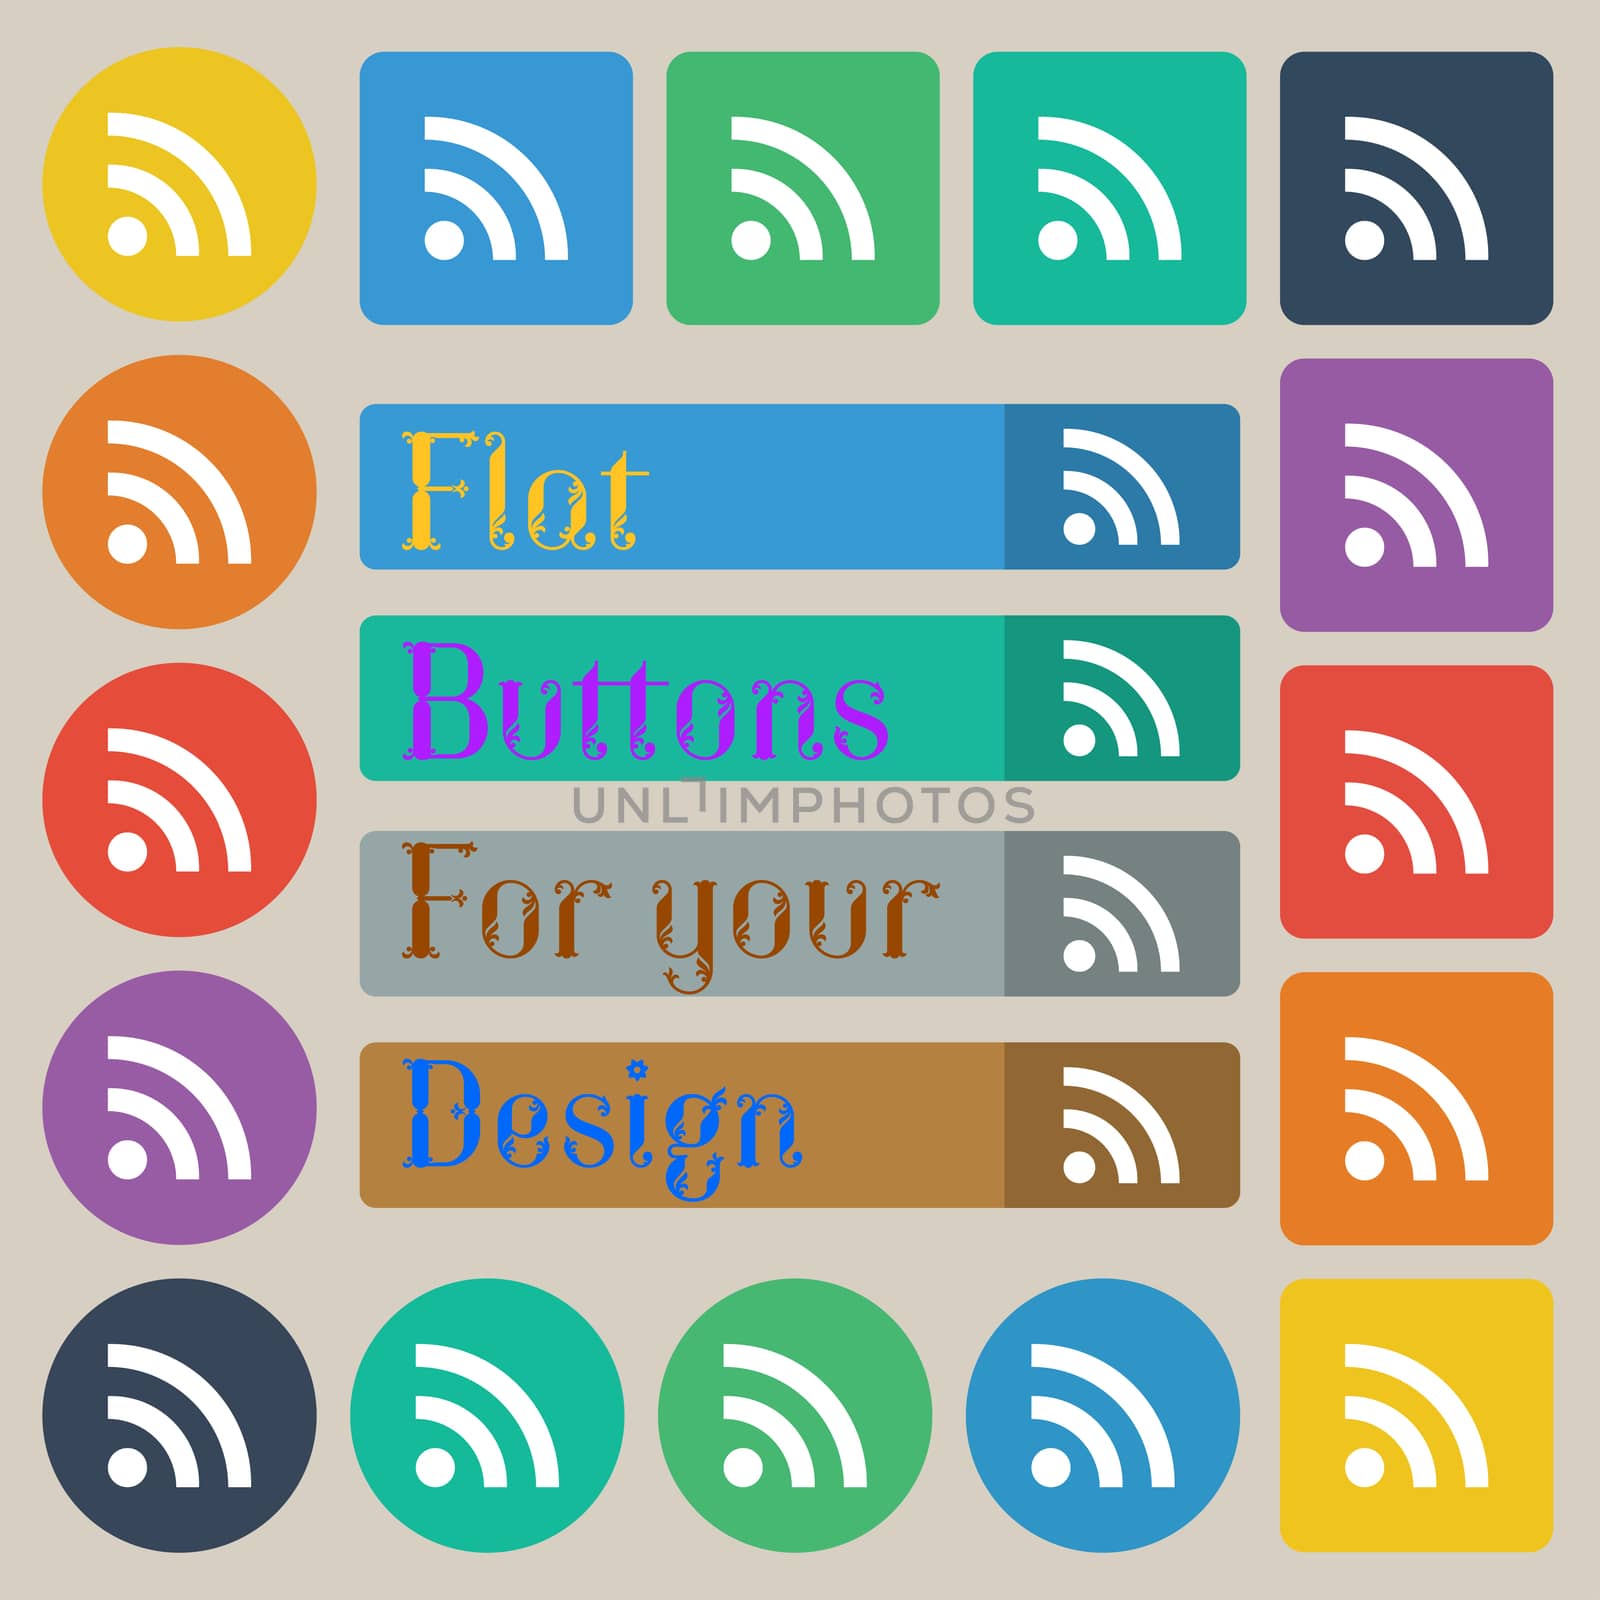 Wifi, Wi-fi, Wireless Network icon sign. Set of twenty colored flat, round, square and rectangular buttons. illustration